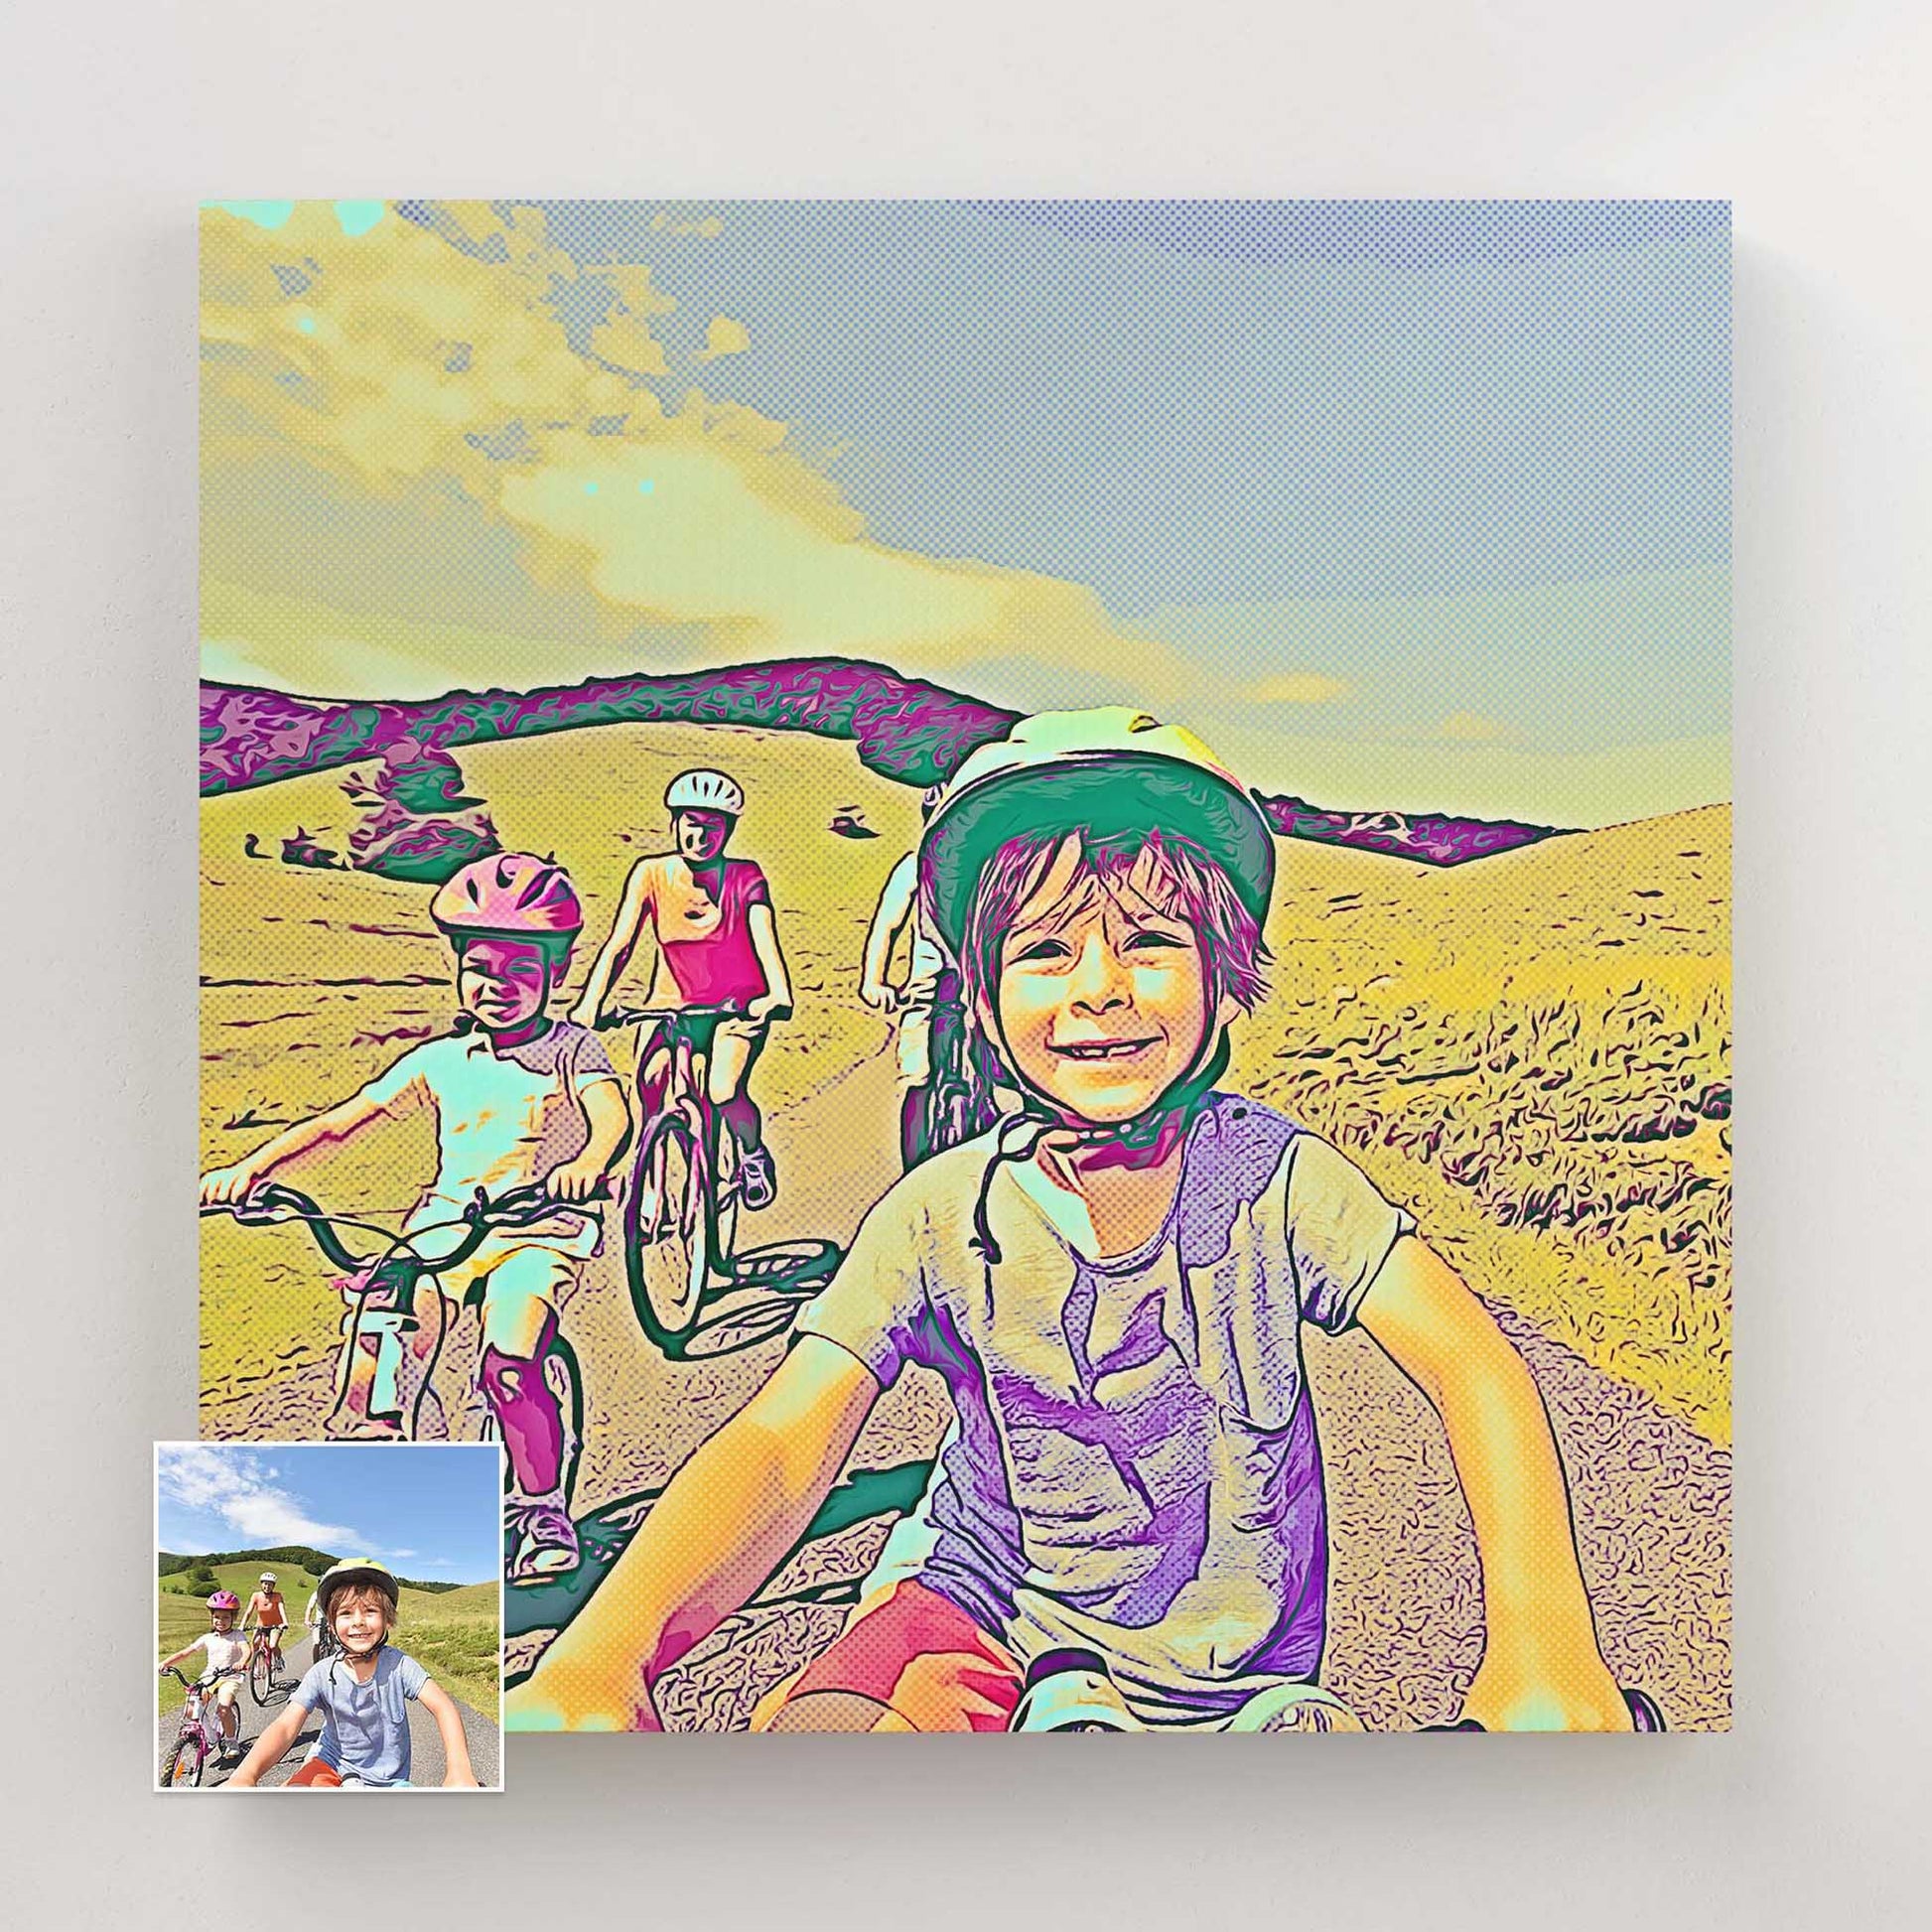 Experience the joy of personalized art with our Personalised Blue and Yellow Cartoon Canvas. We transform your photos into funky and fun cartoon masterpieces that evoke laughter and smiles. These unique pieces are perfect for housewarmings